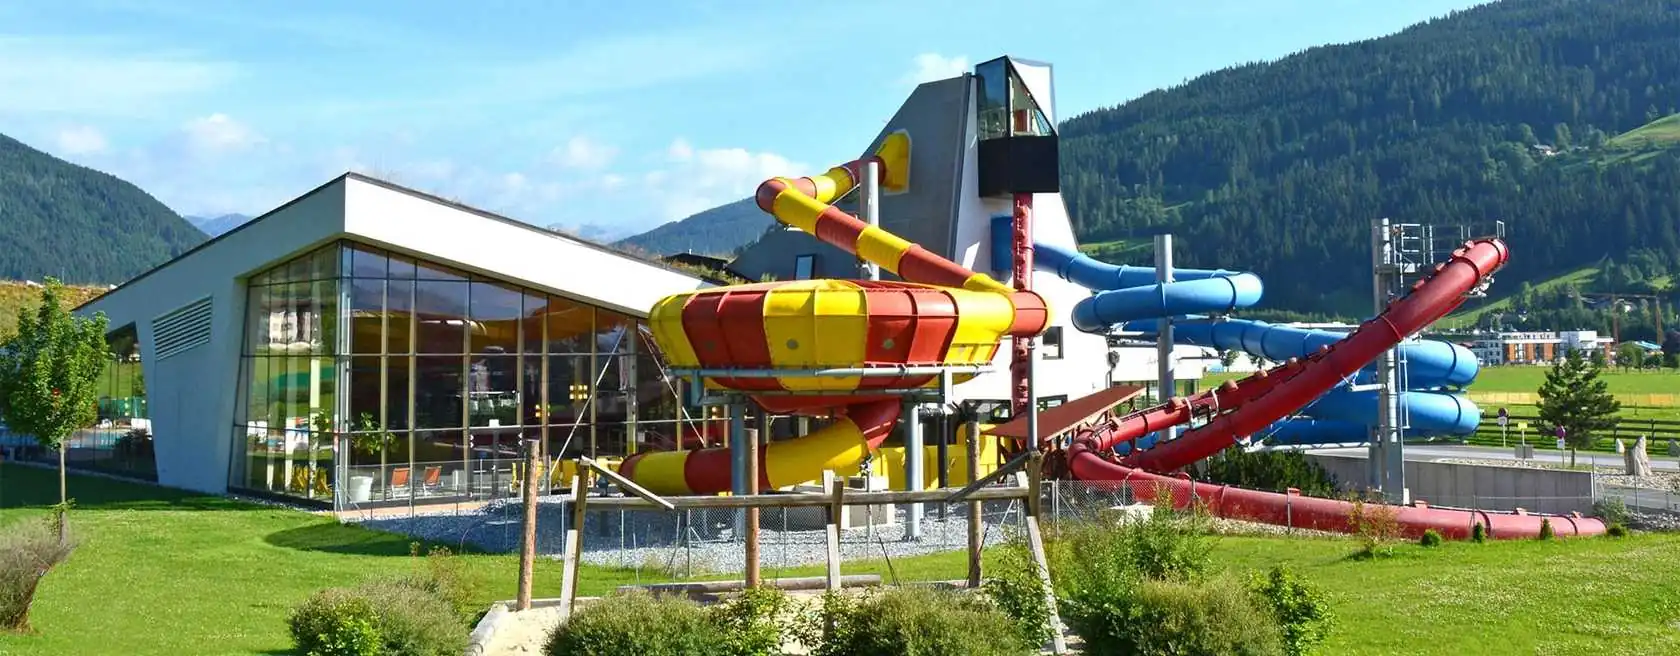 TAUERN SPA Zell Am See